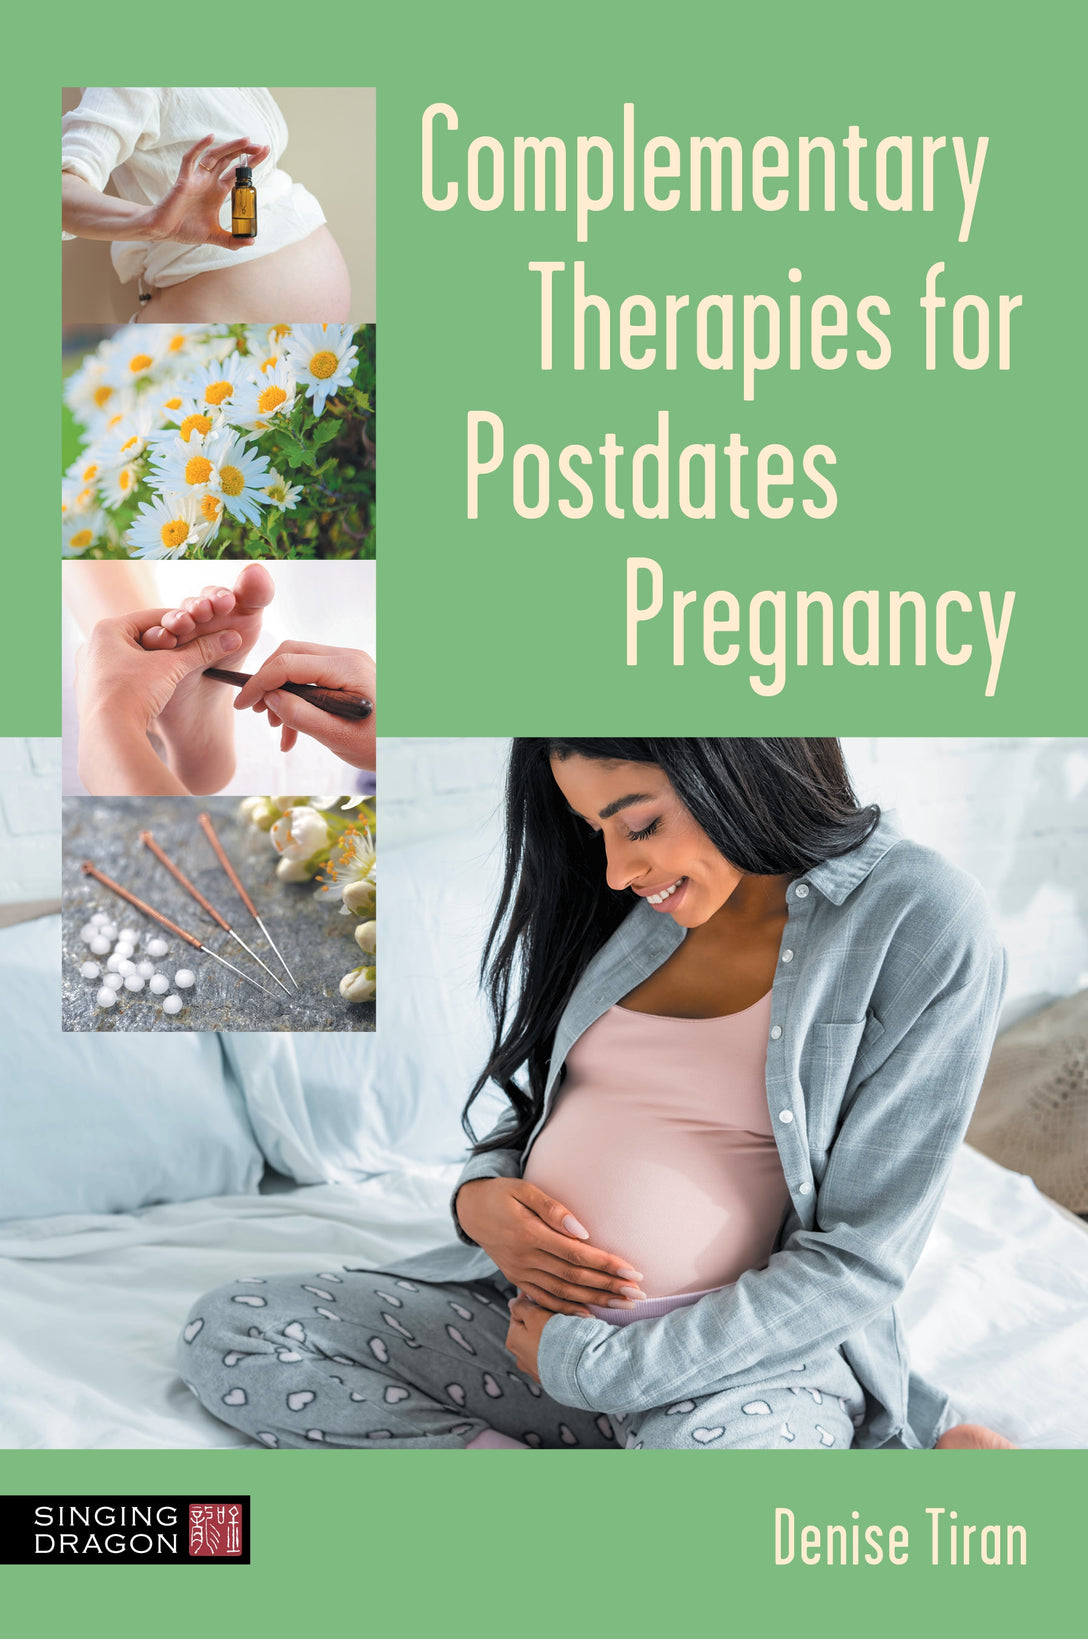 Complementary Therapies for Postdates Pregnancy by Denise Tiran